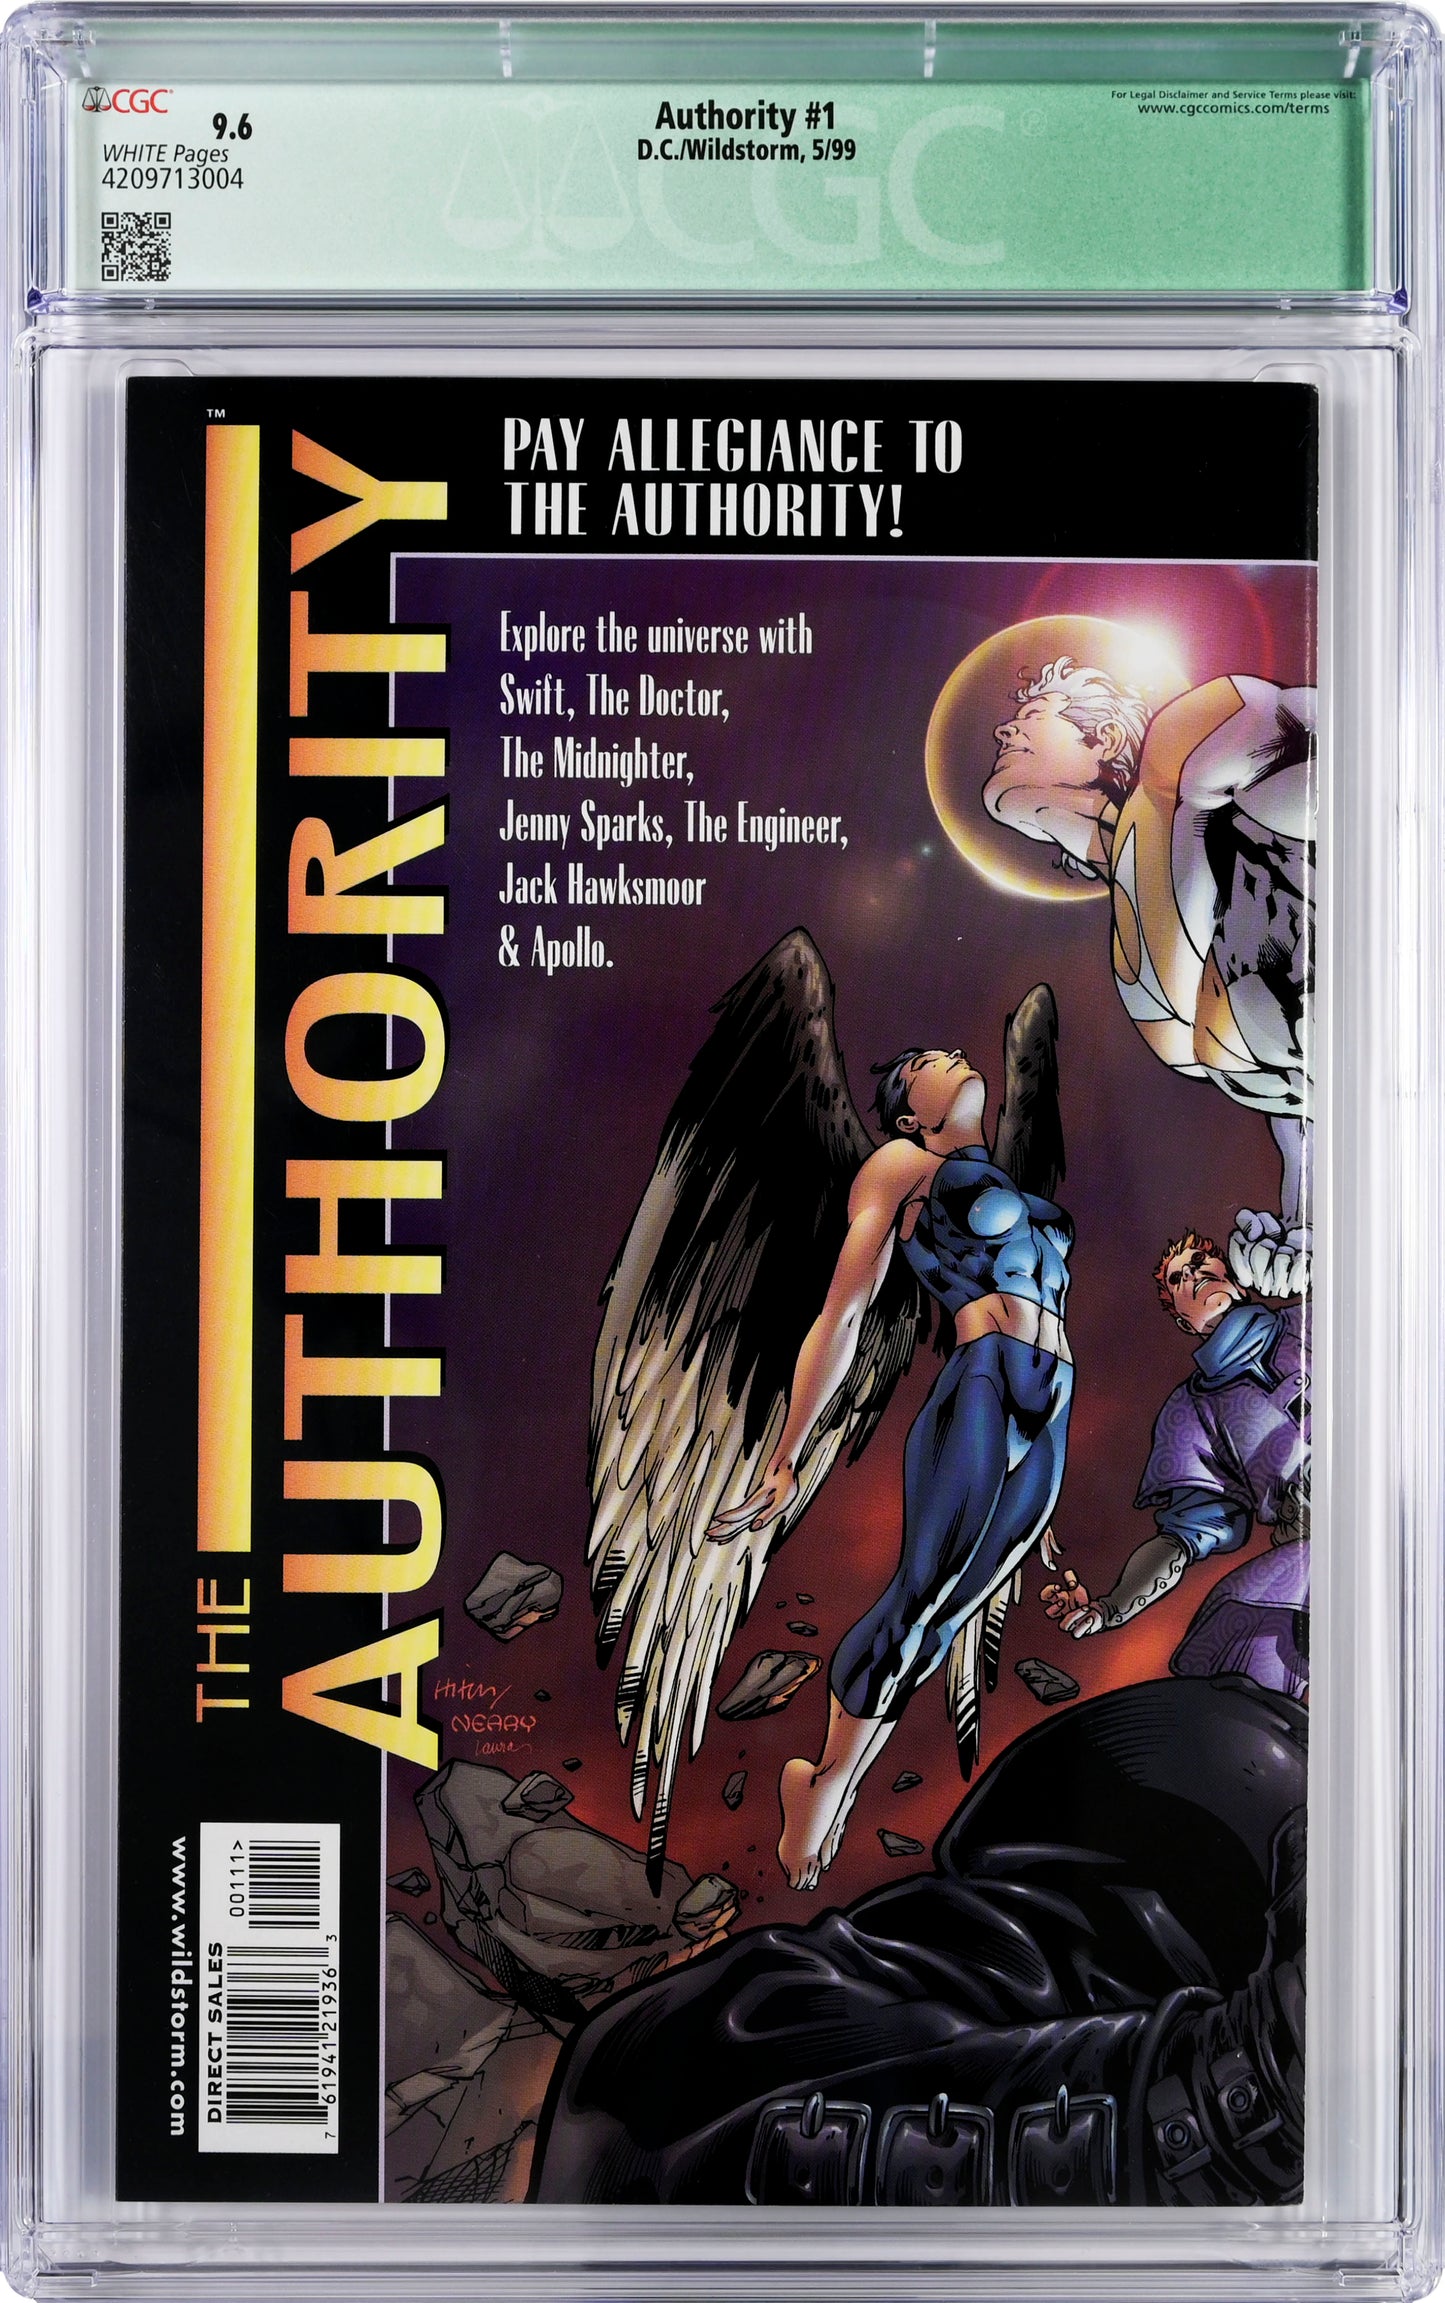 The Authority #1 - Bryan Hitch Autograph - CGC Graded 9.6 - New DCEU Movie